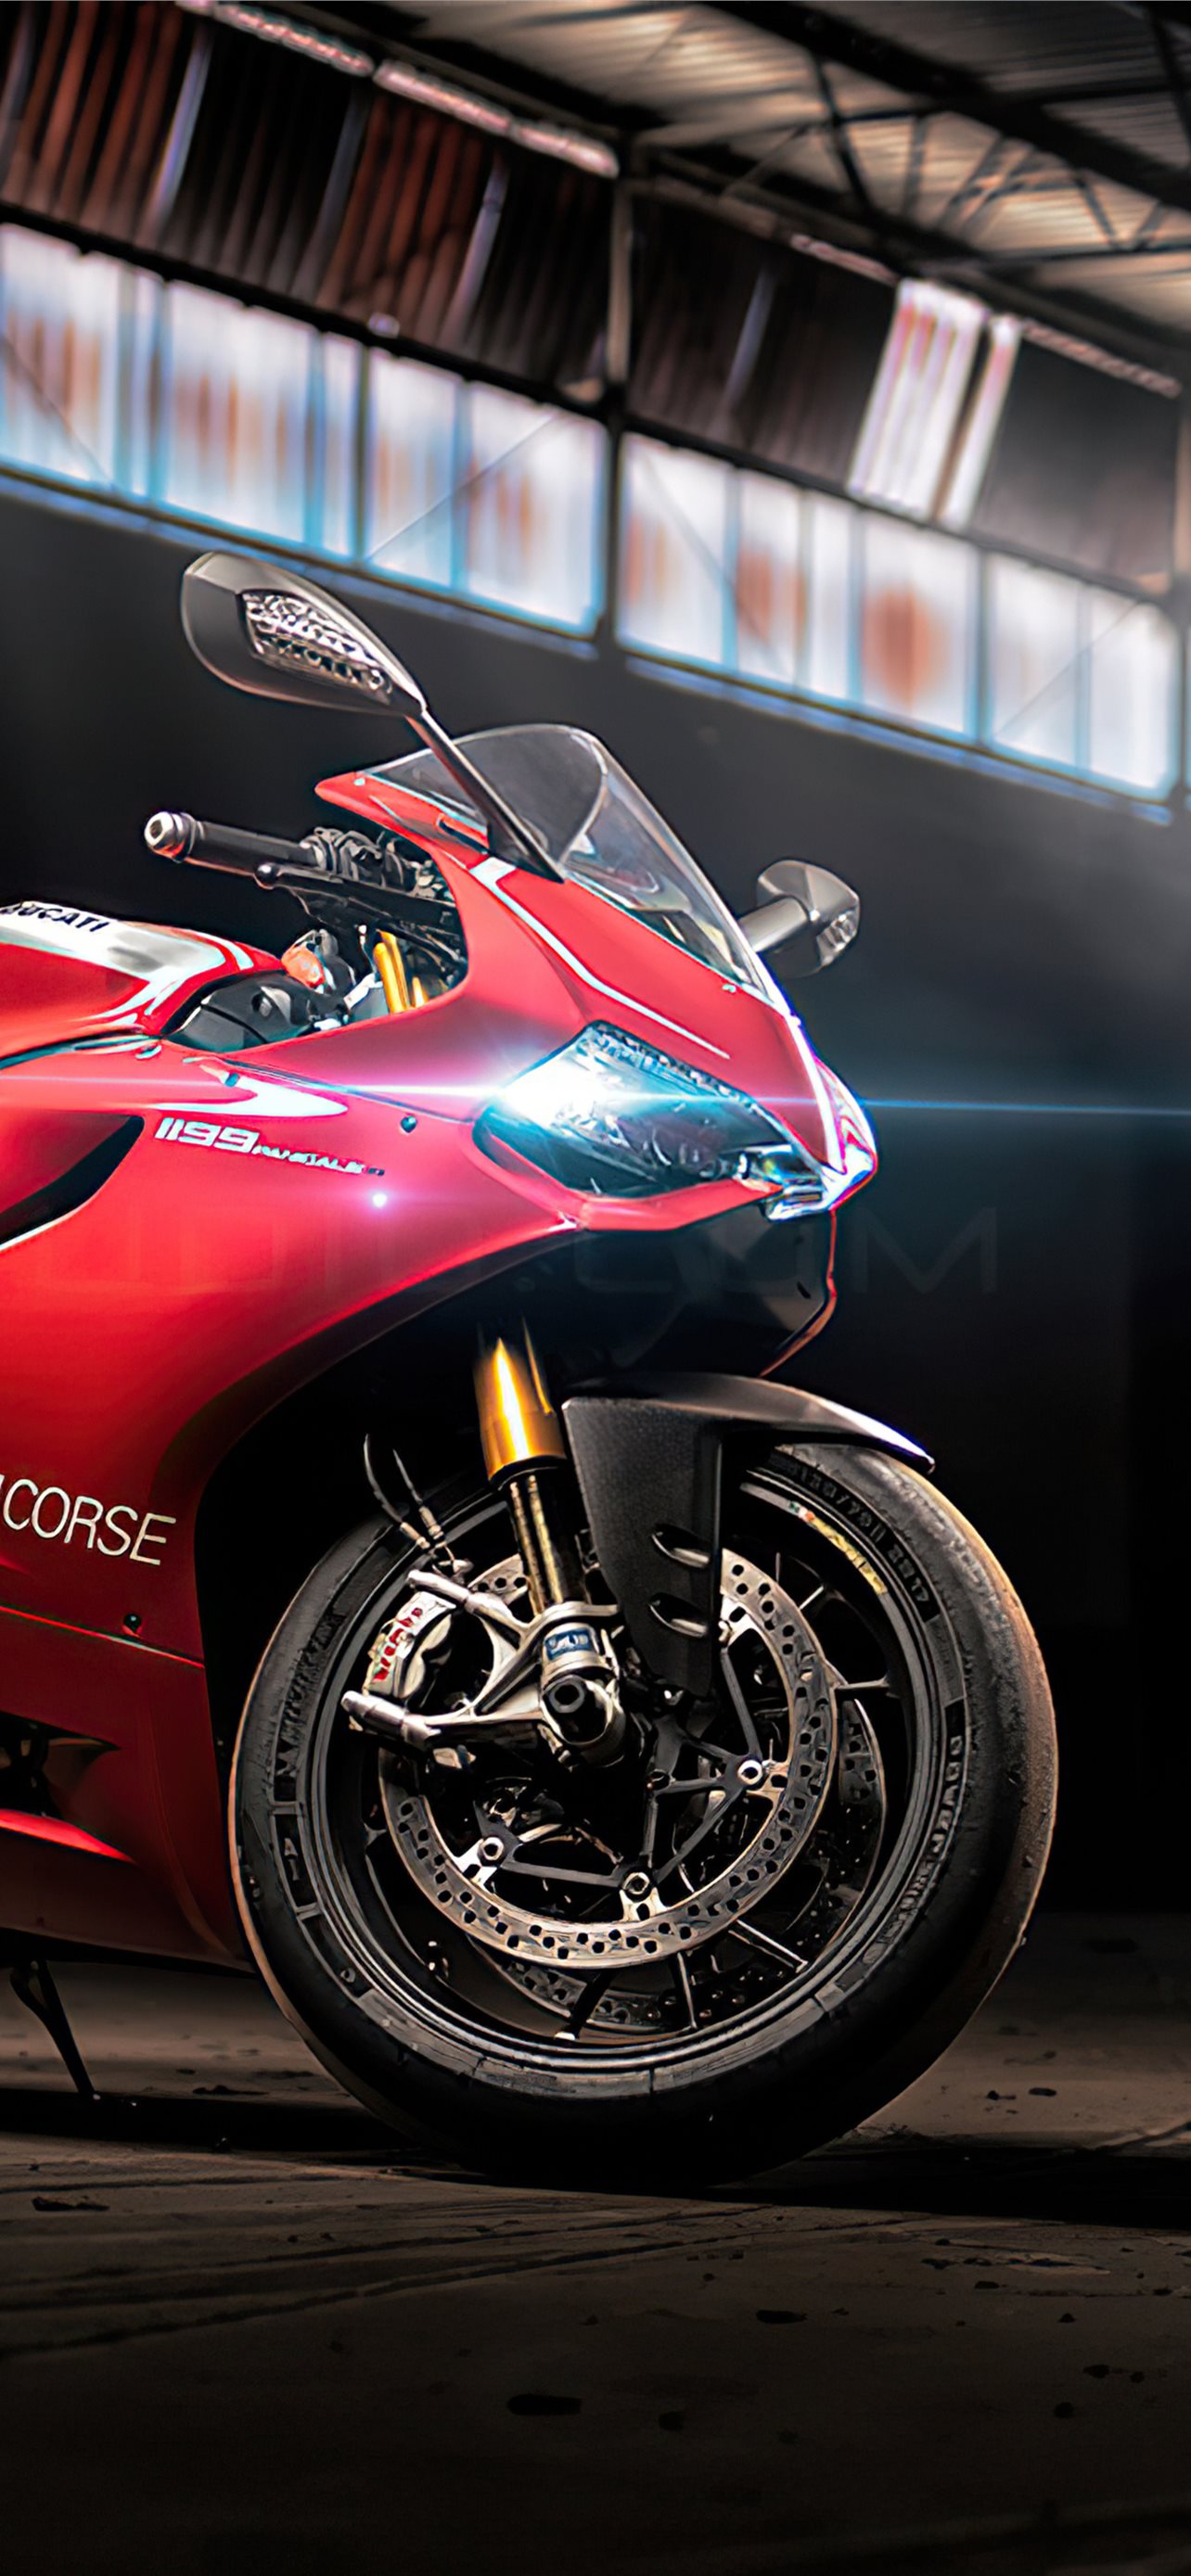 10 Ducati Panigale V4 HD Wallpapers and Backgrounds